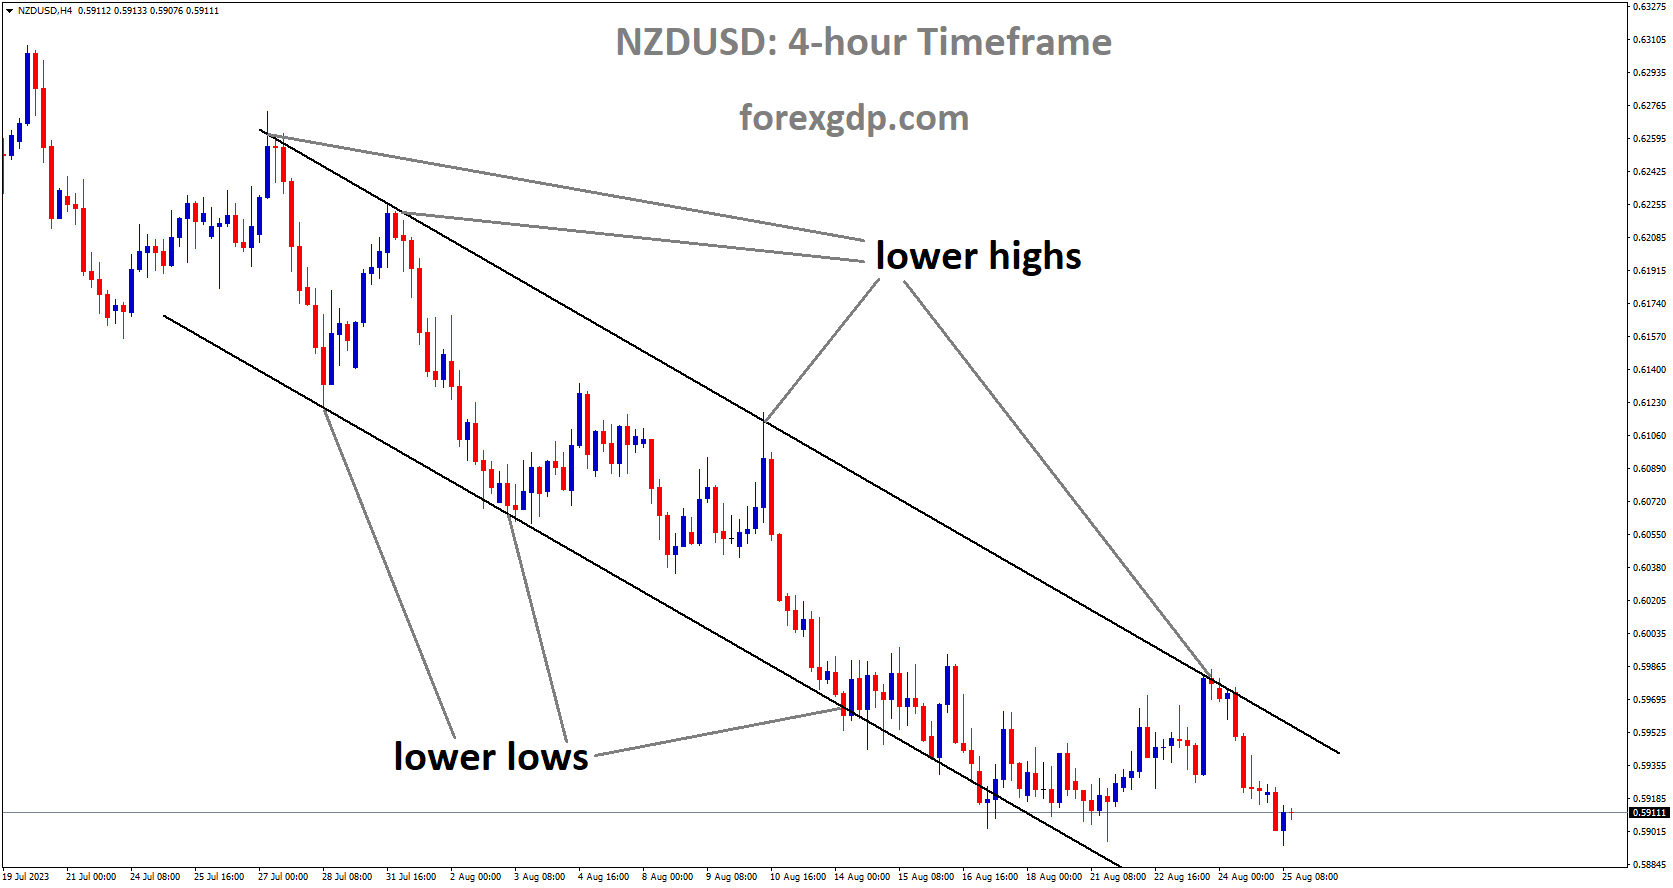 NZDUSD is moving in Descending channel and market has fallen from the lower high area of the channel